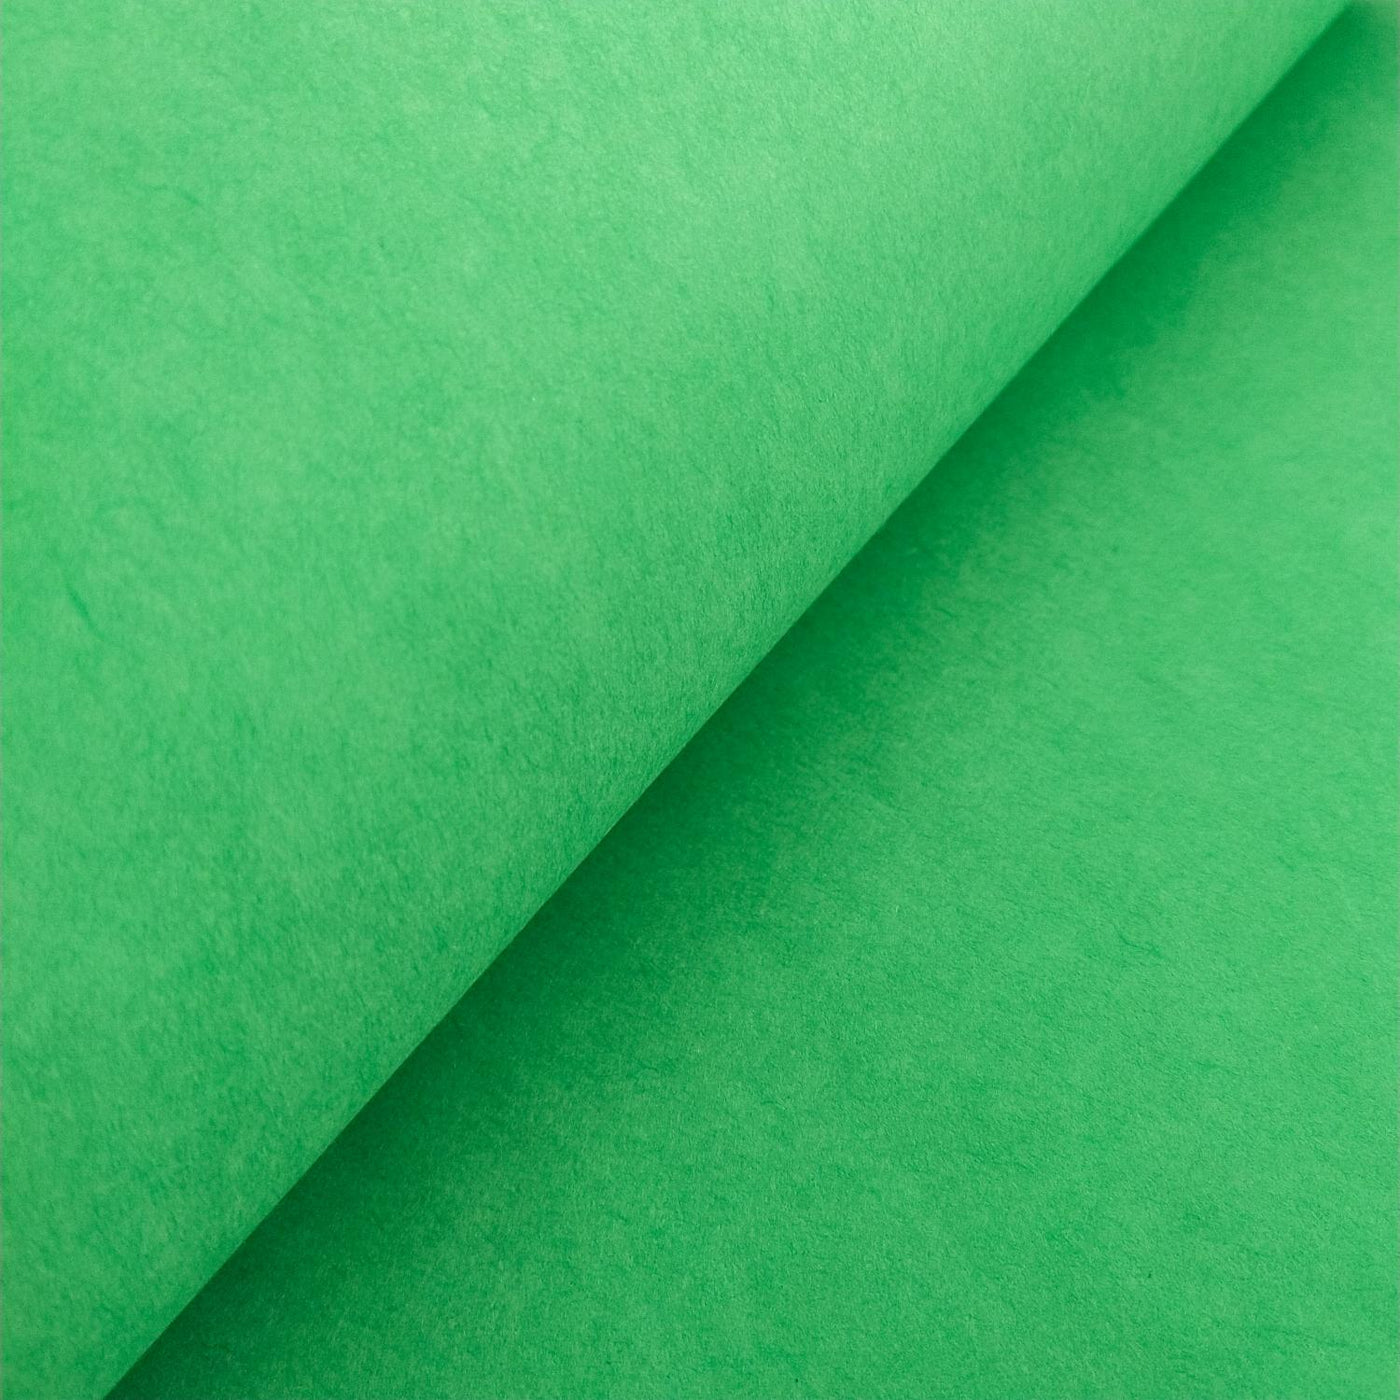 Solid-Colored Kozo Paper (Forest Green)